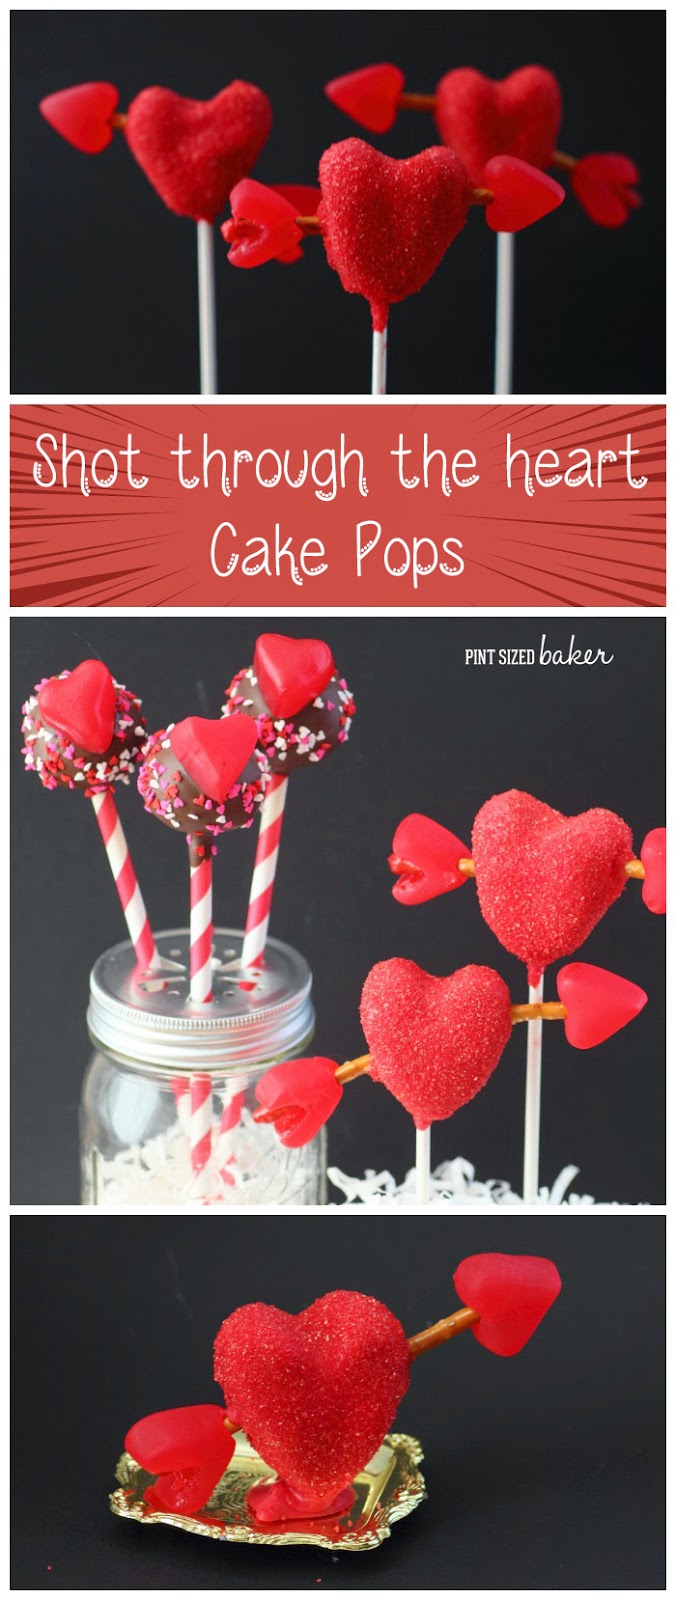 Give your Valentine something to remember! Shooting arrow cake pops are a sure fire way to his heart!